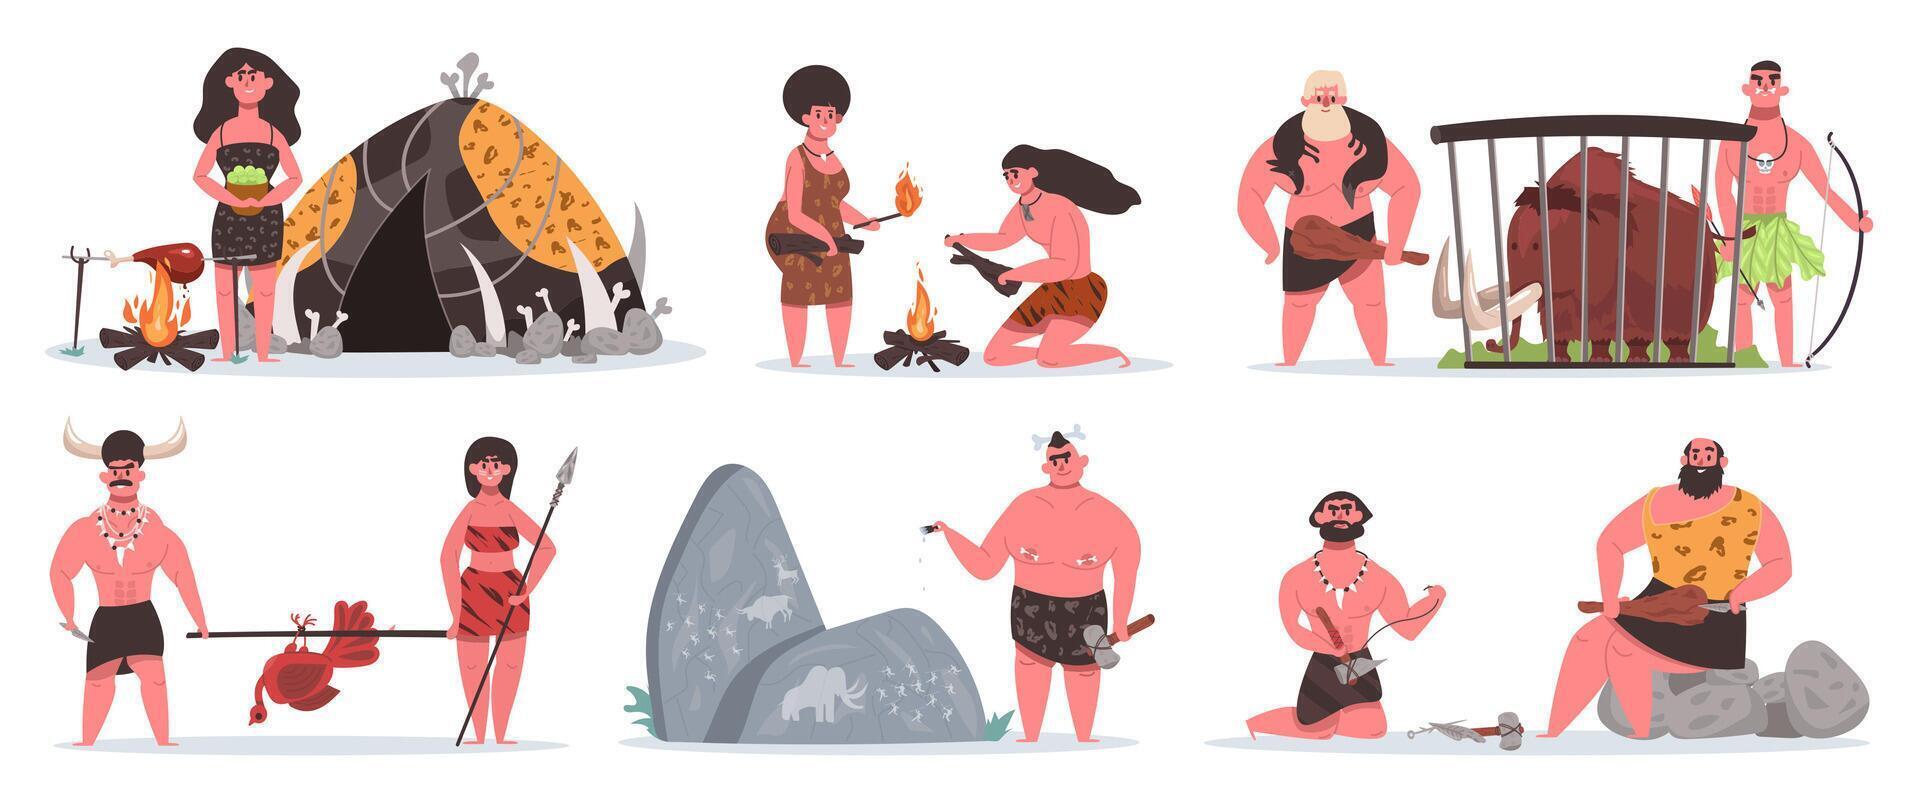 Prehistoric characters. Caveman life scenes, stone age cave and hut. Hunting, cooking and collecting primitive people vector illustrations